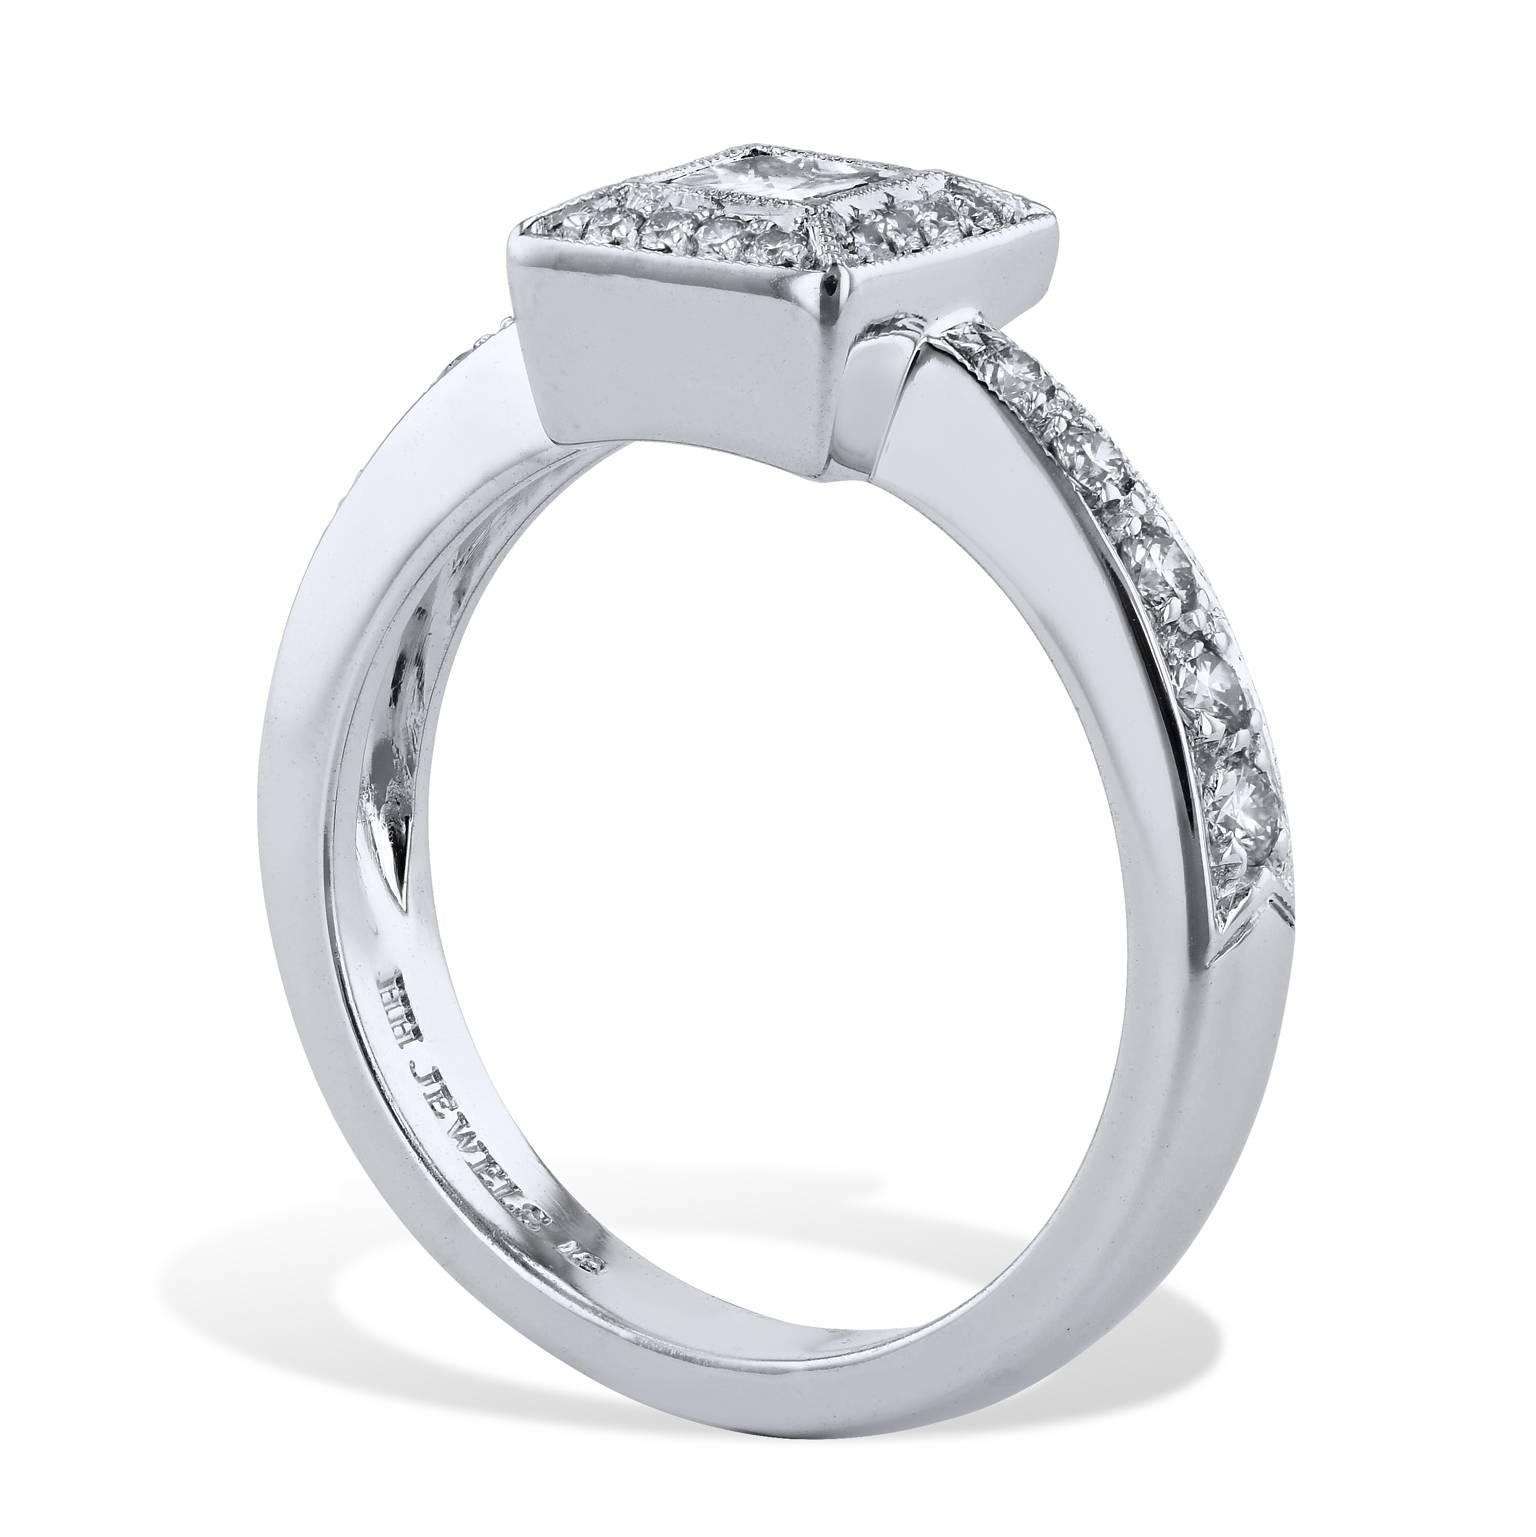 This 0.35 carat princess cut diamond (H/VS) surprises and excites with transcendent elegance in this handmade 18 karat palladium engagement ring. 0.23 carat of pave set diamonds (H/VS) adorn the bezel and cascade down the shank; further highlighting